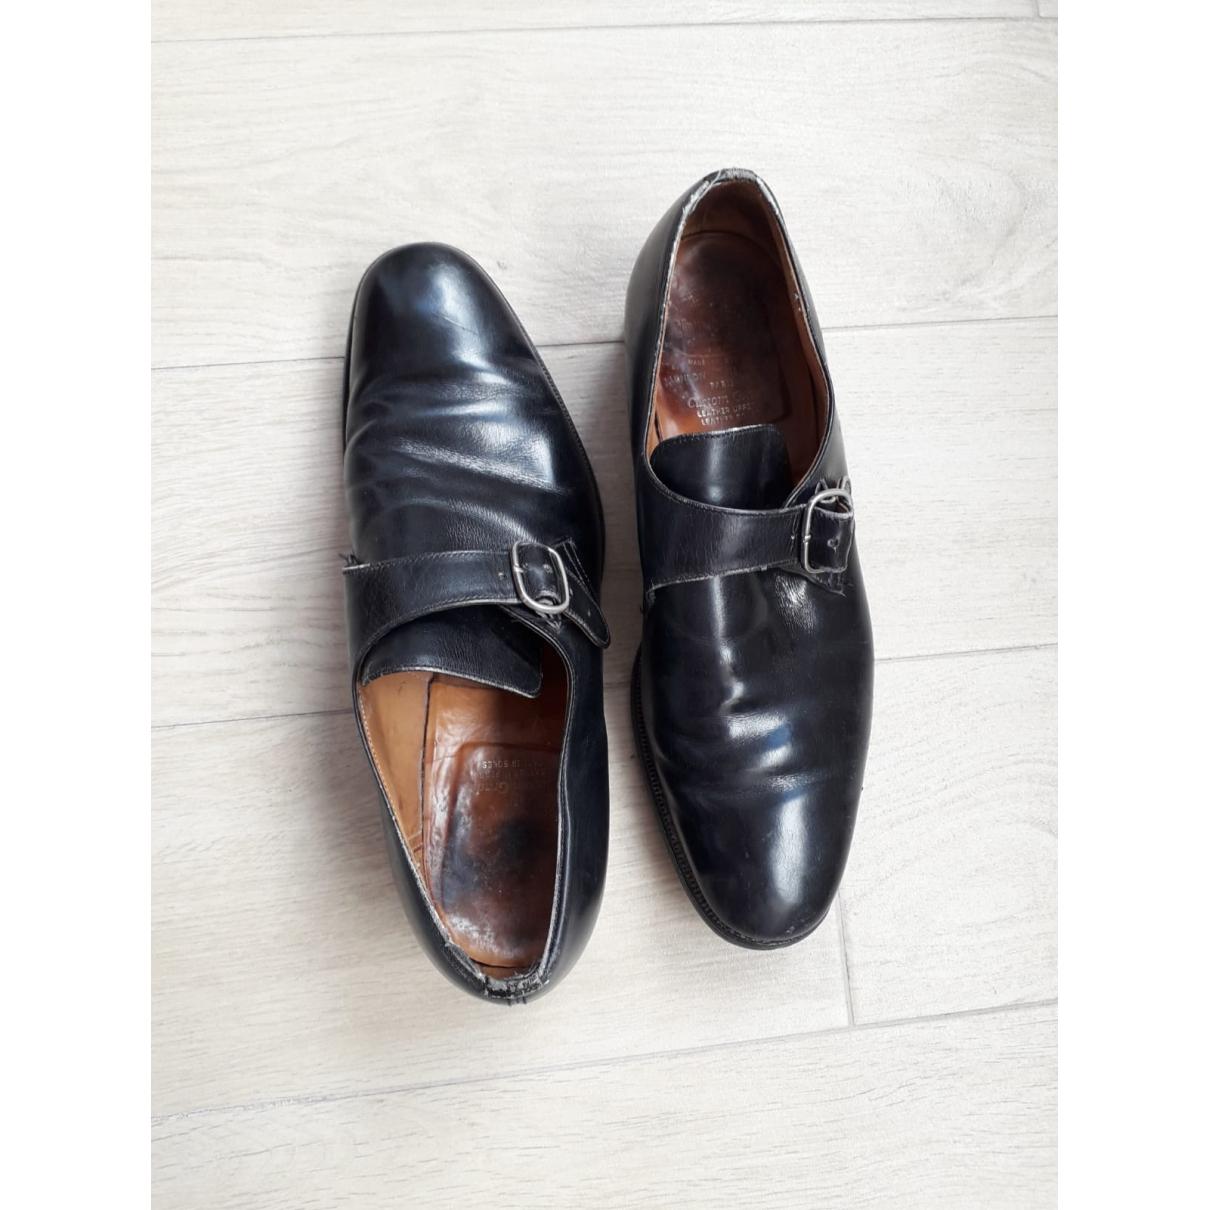 Church's Leather Flats in Black for Men - Lyst